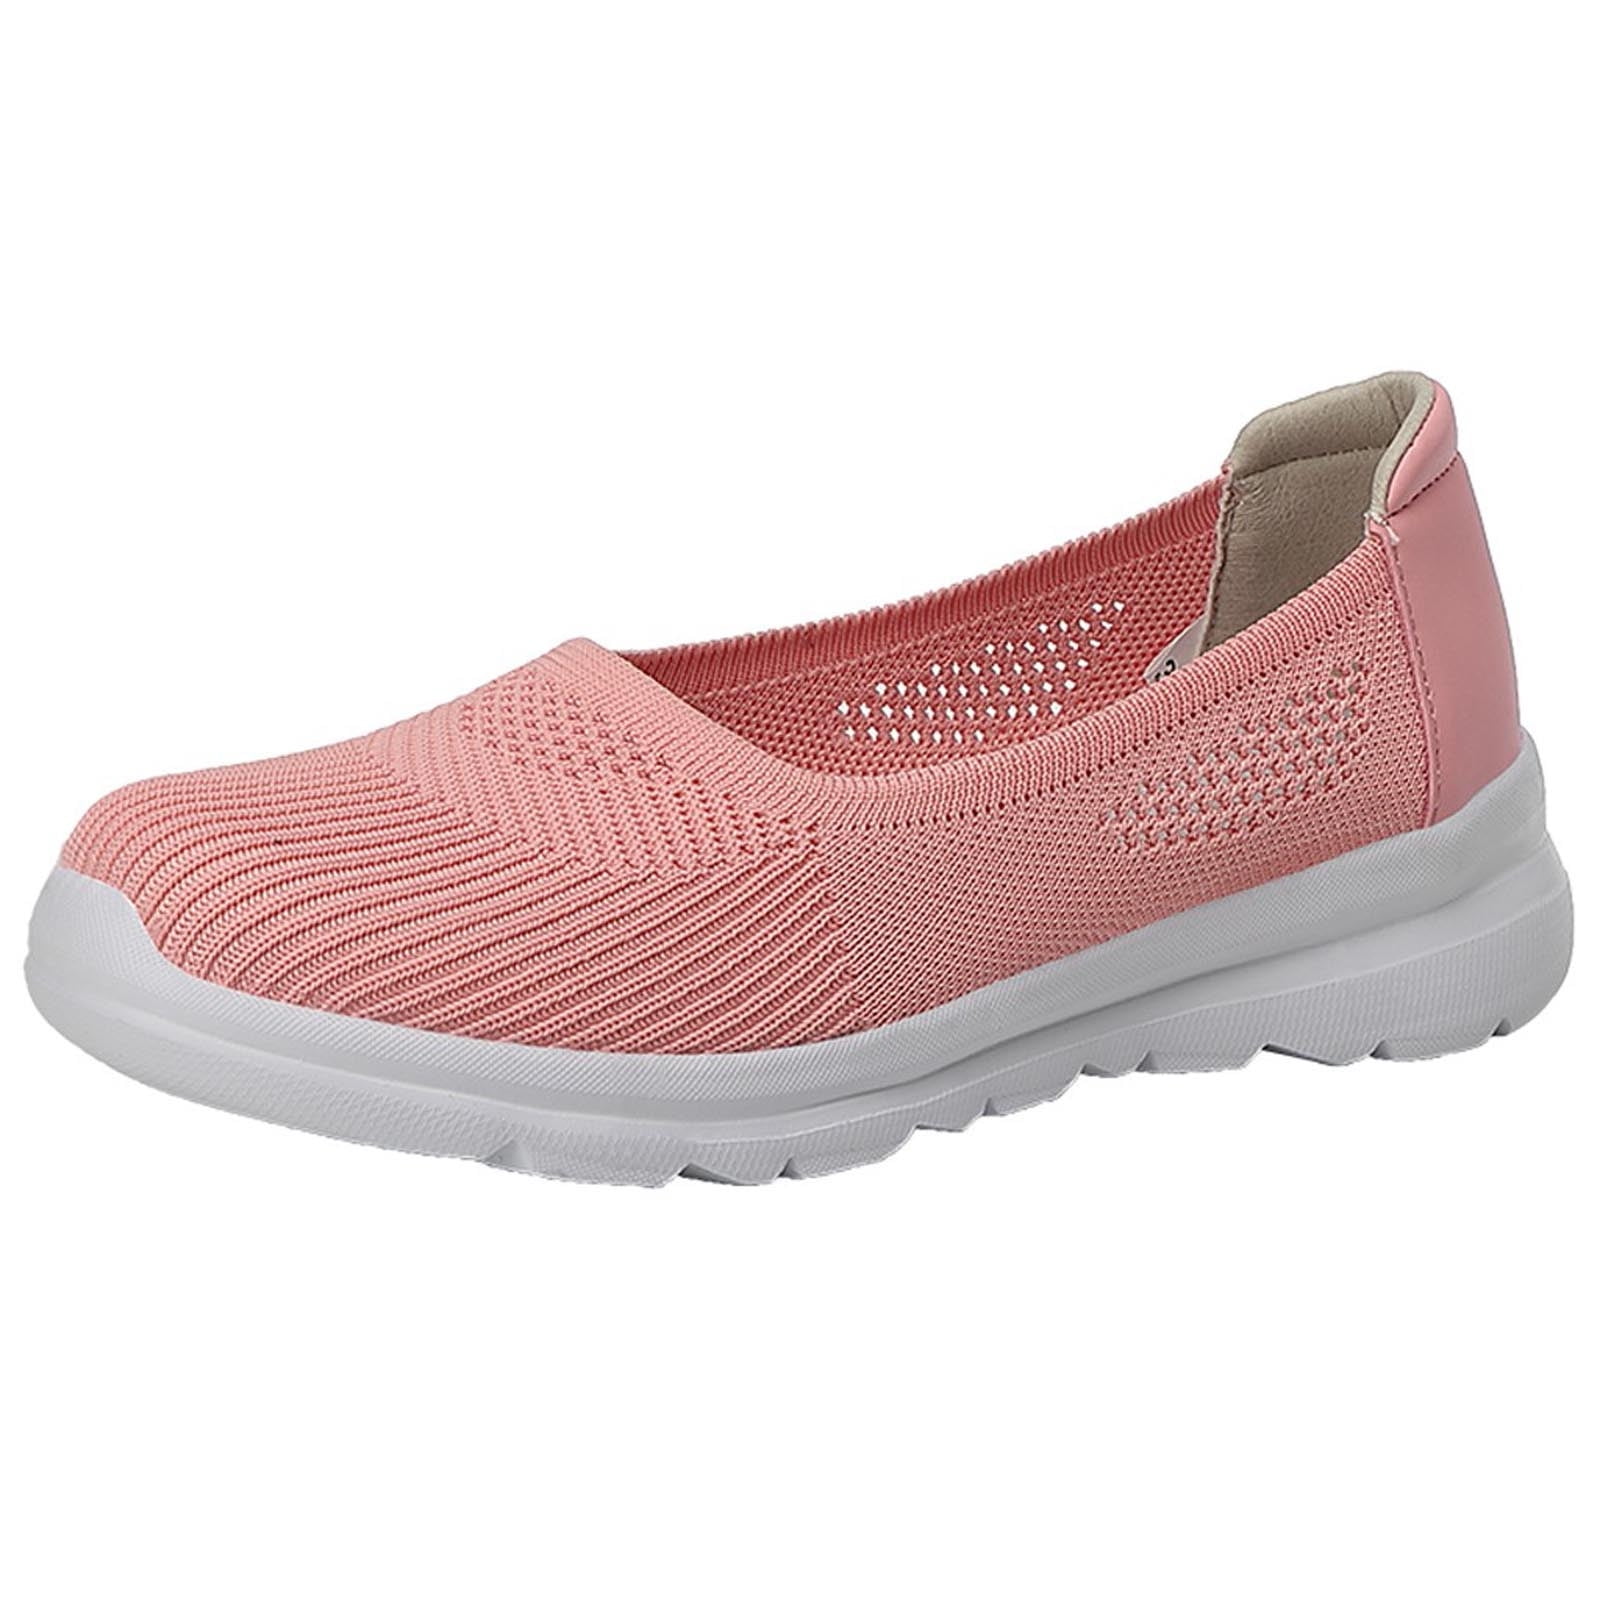 AnuirheiH Solid Non-Slip Pumps Shoe Sneakers Casual Shoes Student Running Shoes On Sale - Walmart.com